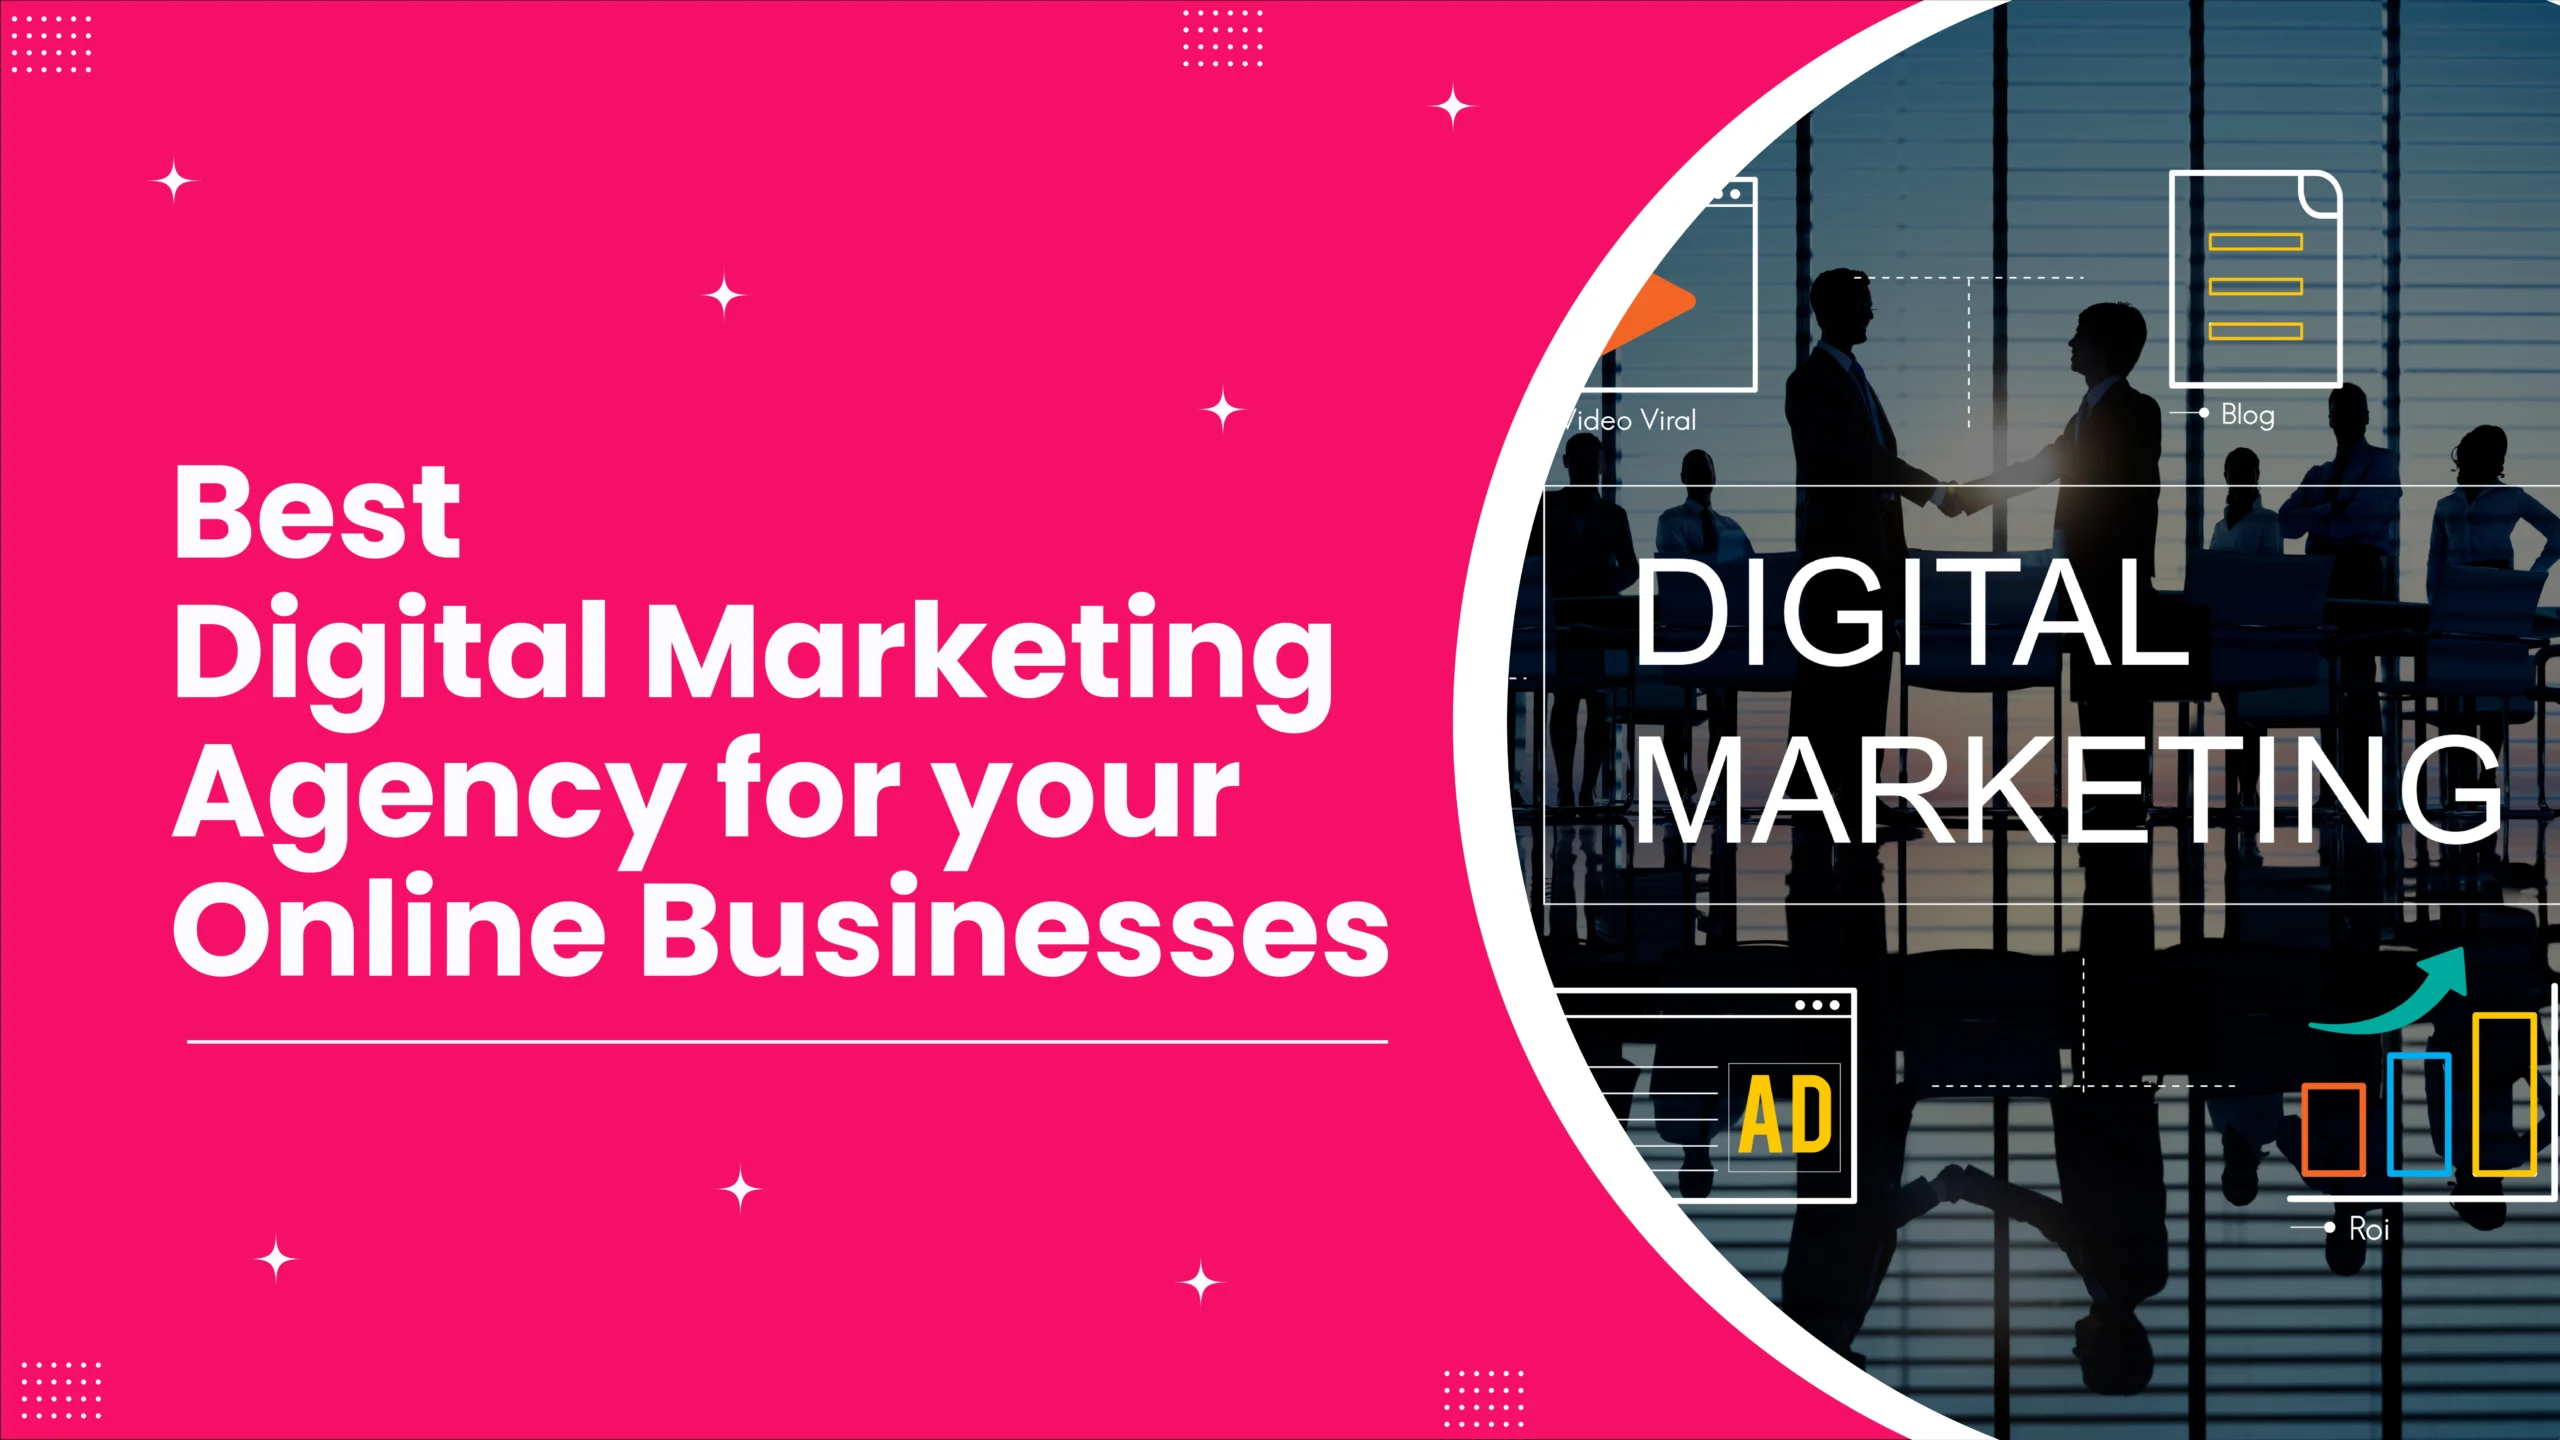 Best Digital Marketing Agency for Your Online Business